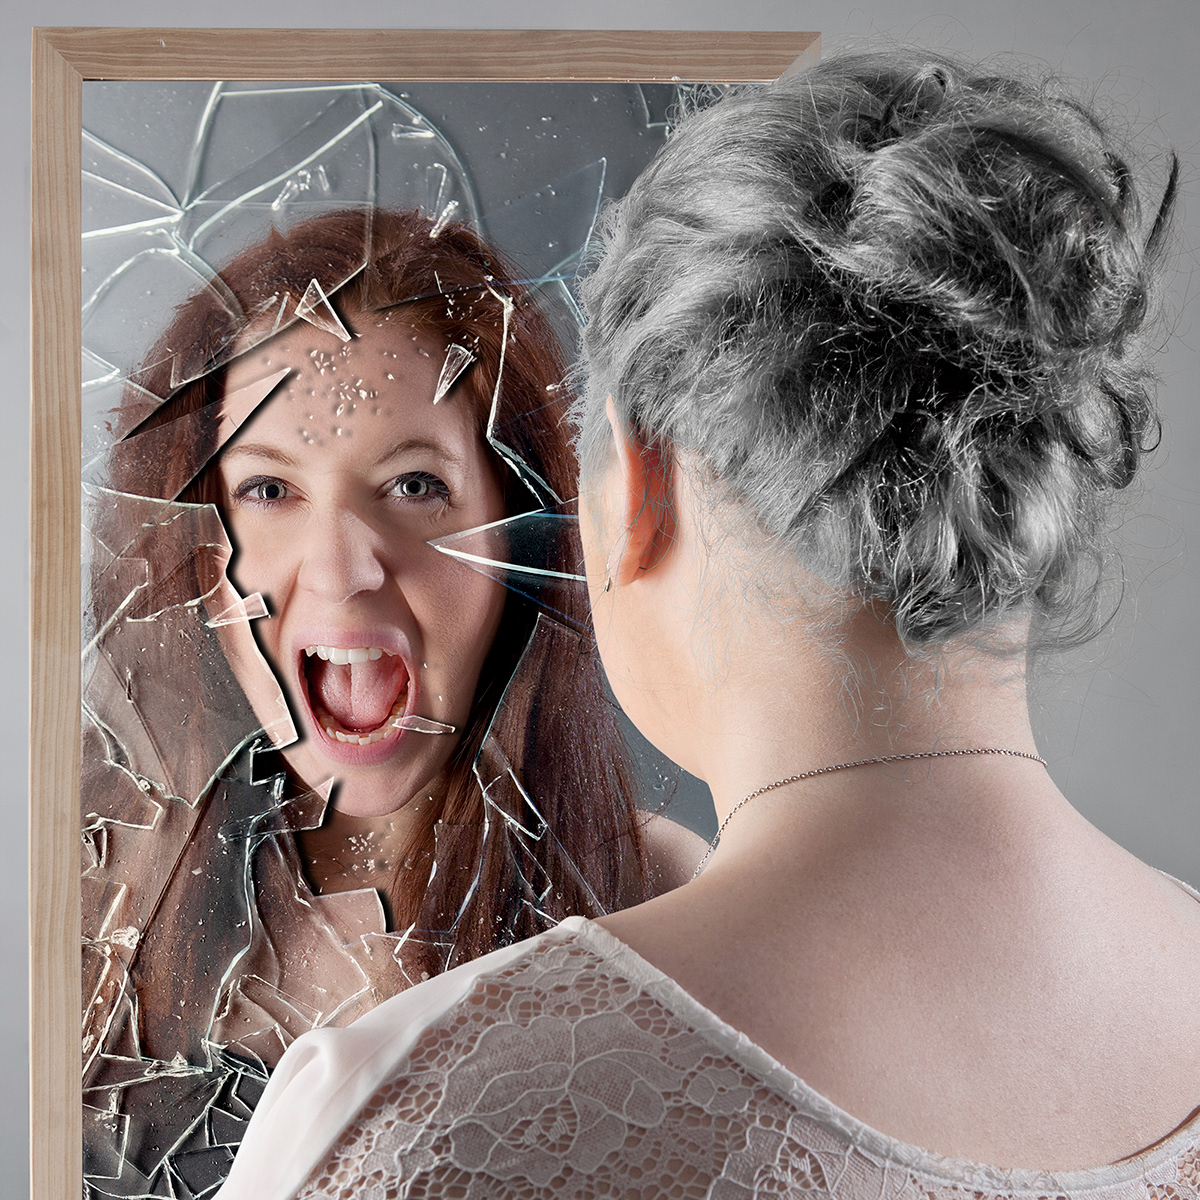 old Young mirror fear woman people photo art